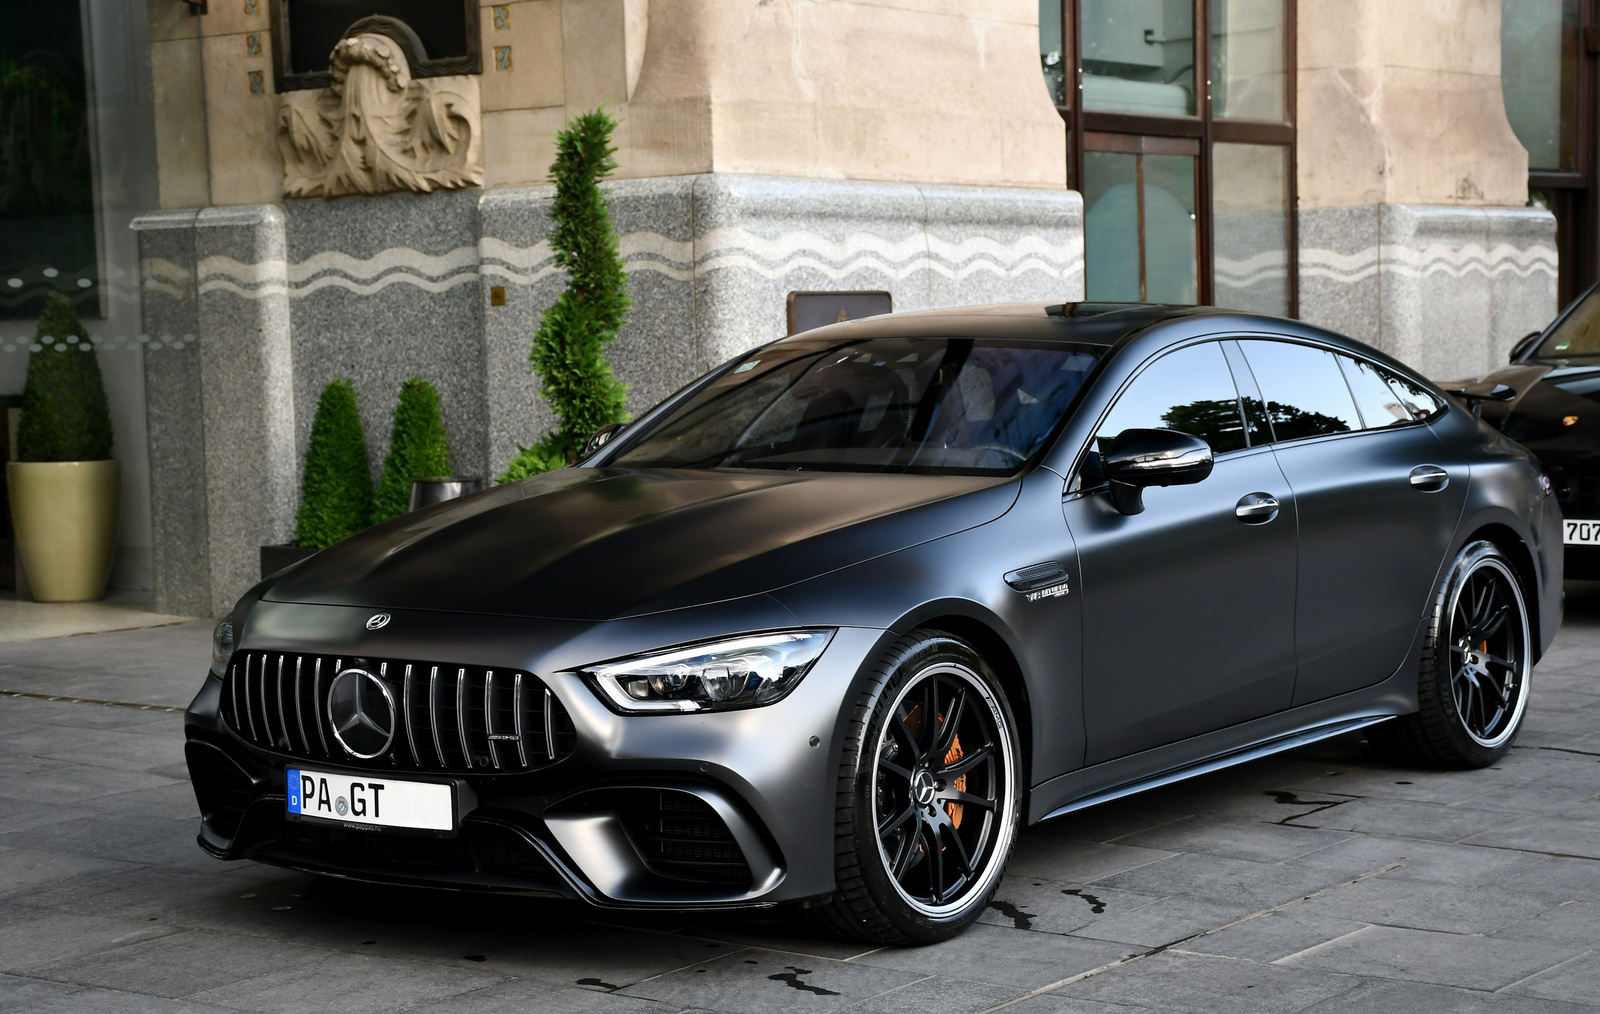 Mercedes-AMG GT 63 S Edition 1